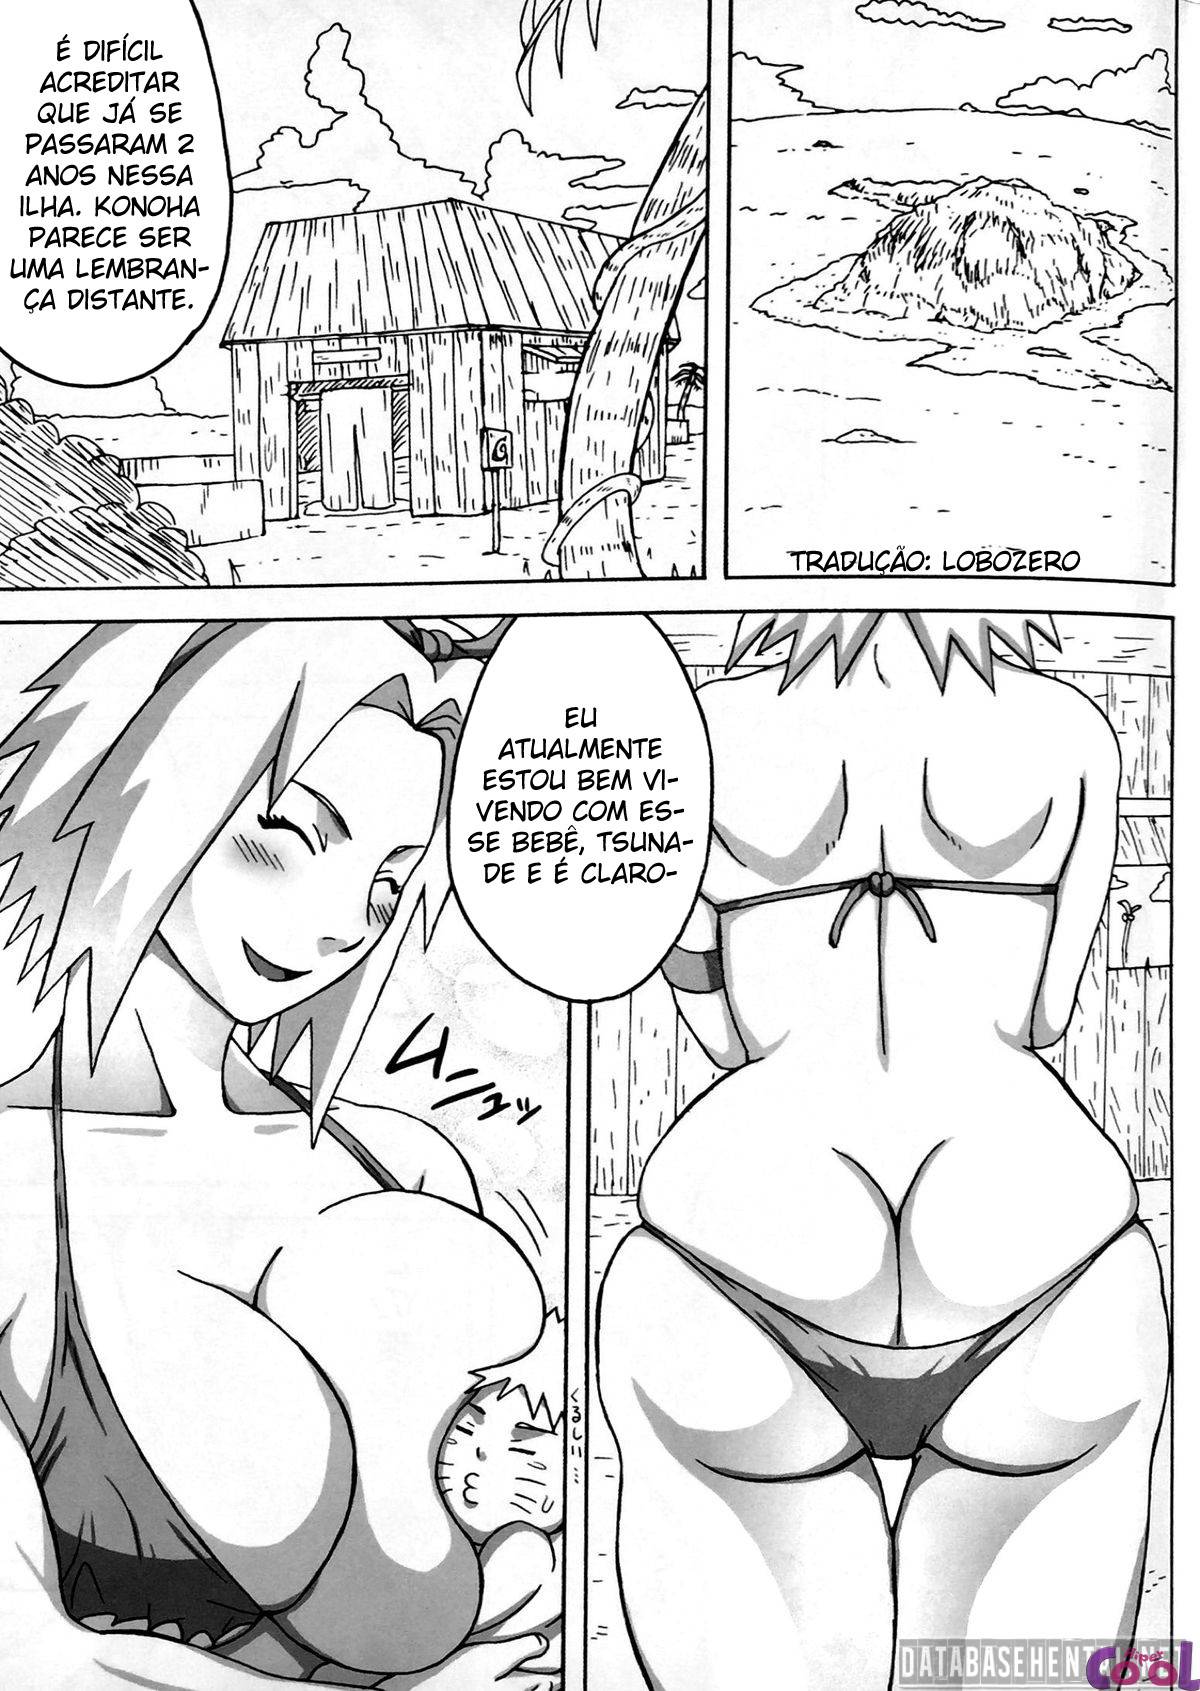 jungle-go-chapter-01-page-20.jpg